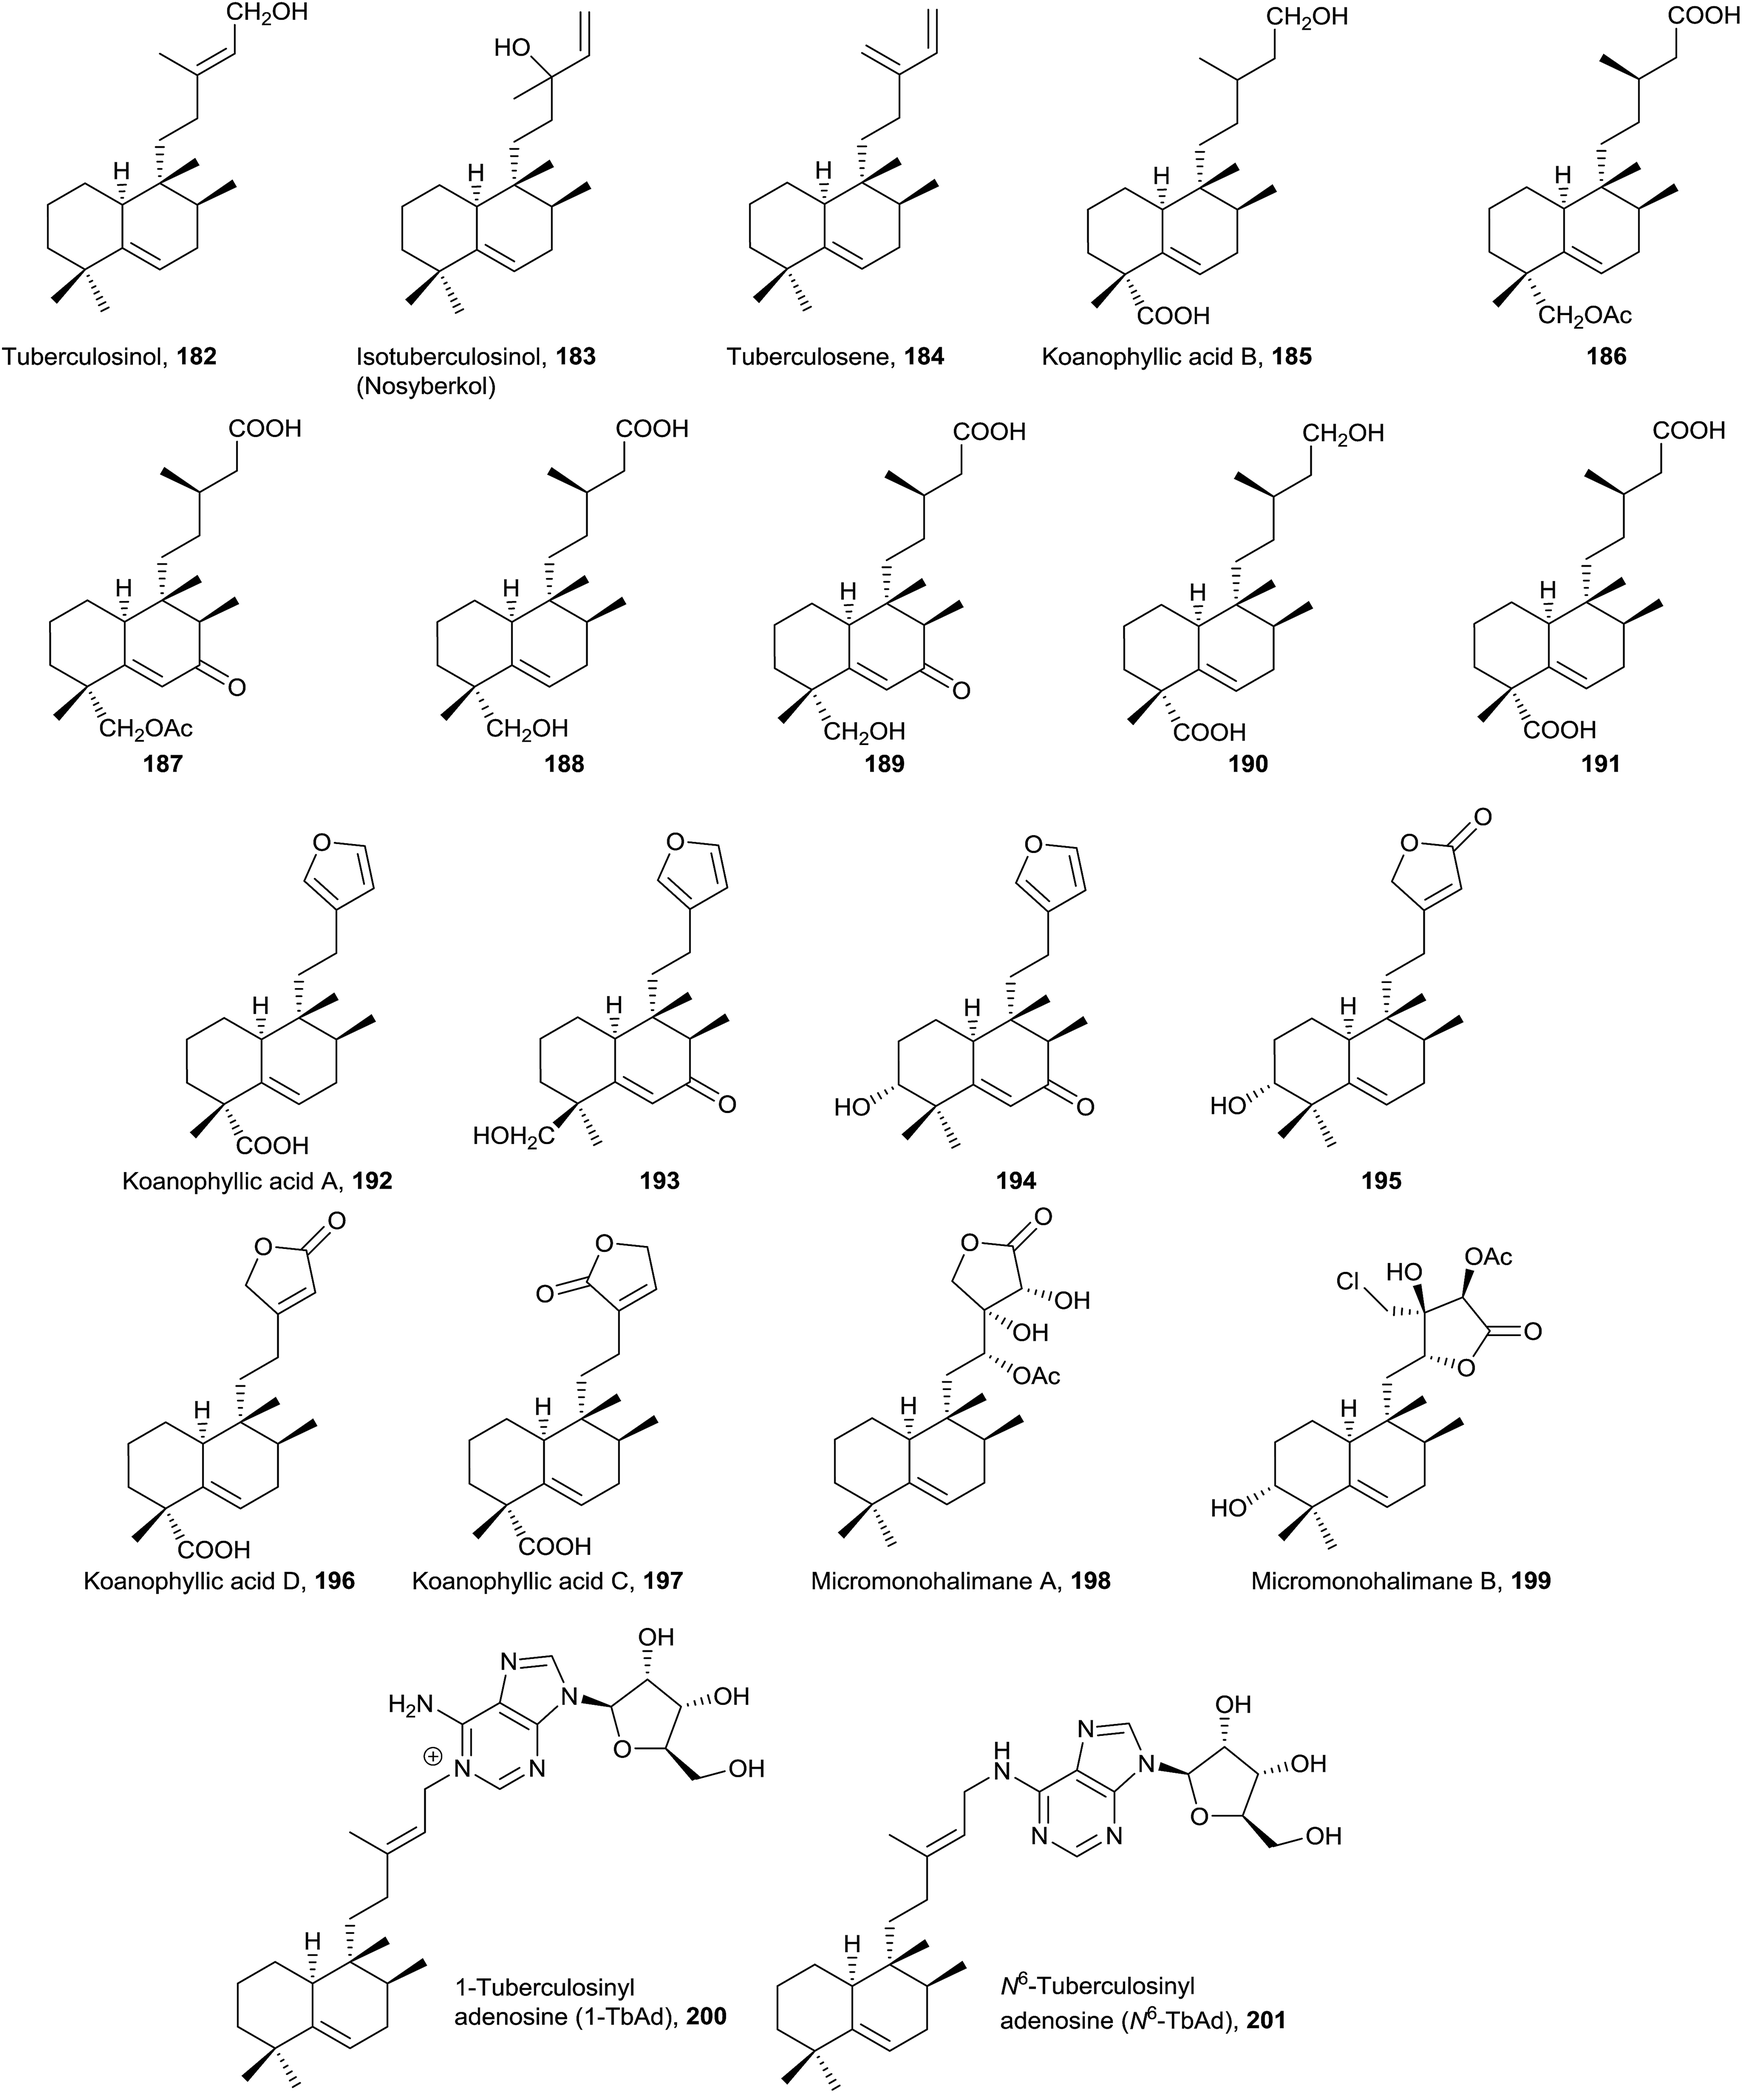 Halimane Diterpenoids Sources Structures Nomenclature And Biological Activities Natural Product Reports Rsc Publishing